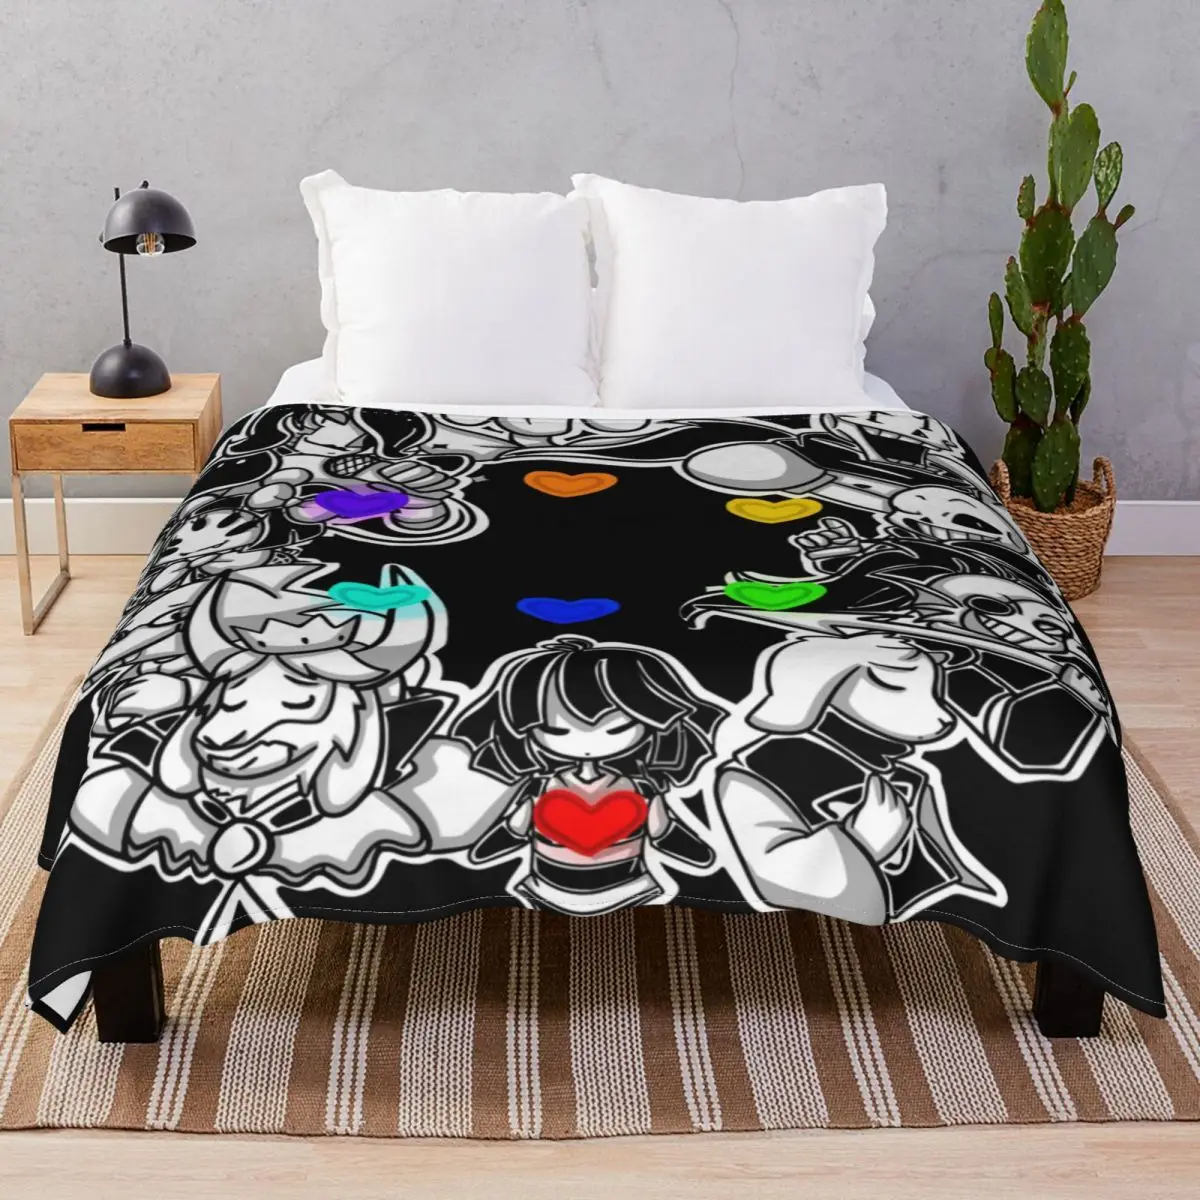 Undertale Blanket Flannel Printed Ultra-Soft Unisex Throw Blankets for Bed Home Couch Camp Cinema